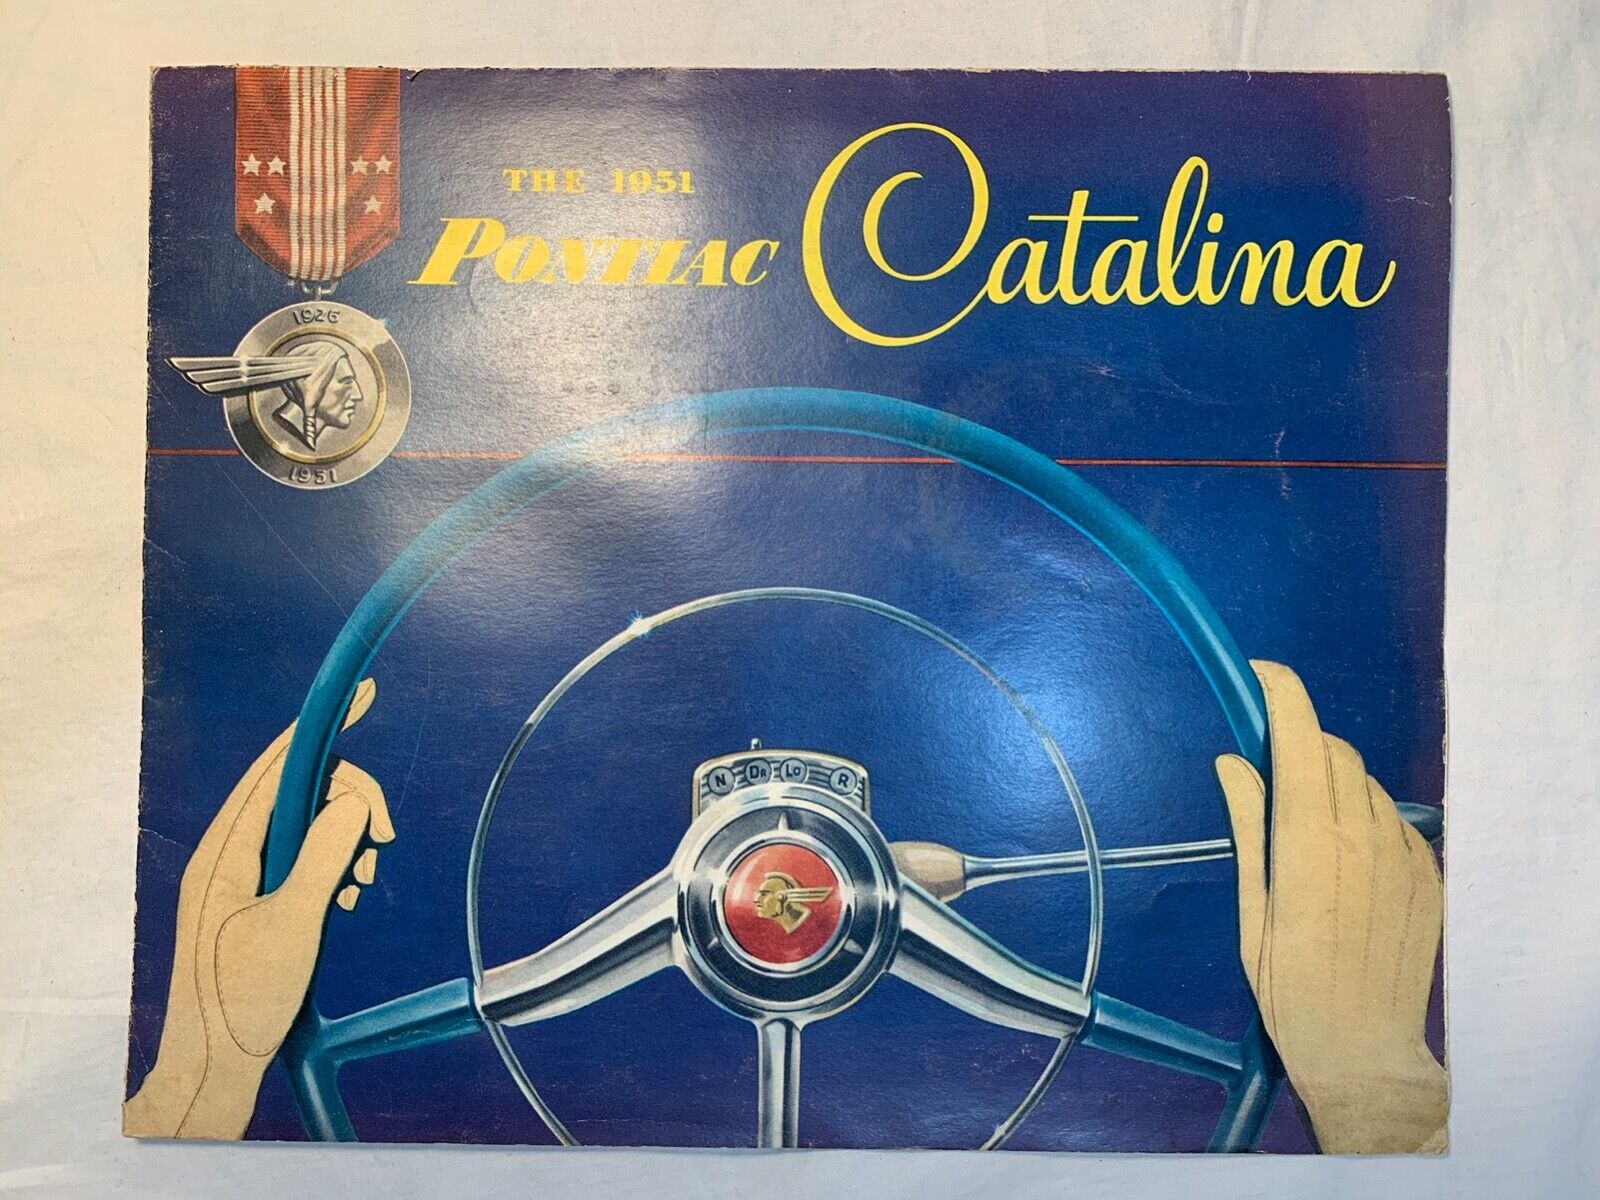 1951 Pontiac Catalina Full Color Brochure fold out poster size 